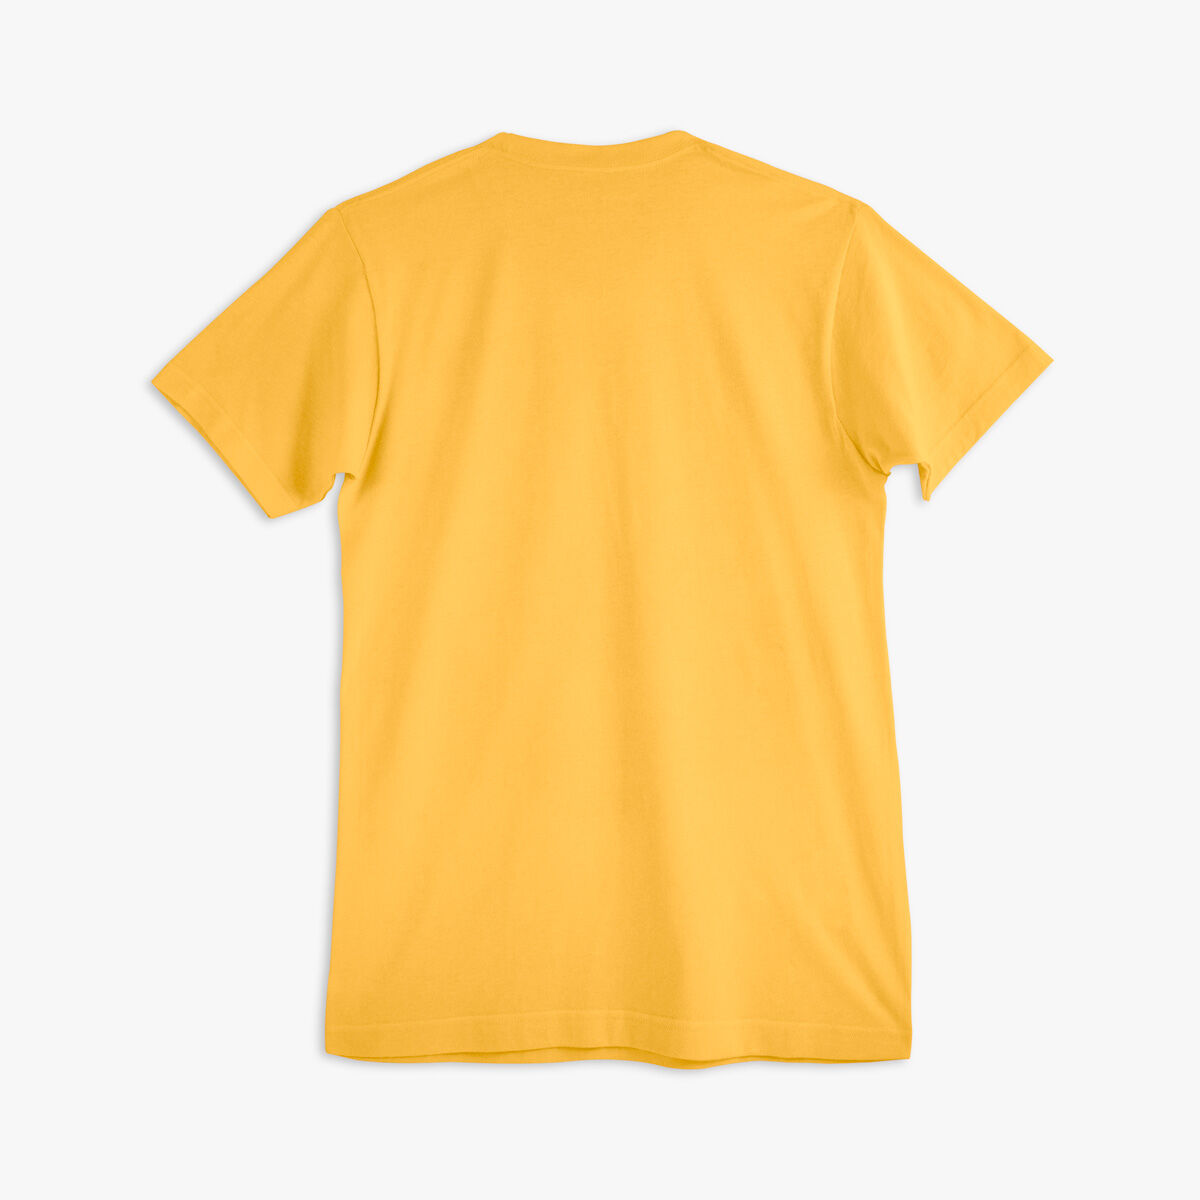 Hard Rock Adult Fit Festival Tee with Love All Serve All in Mustard Yellow